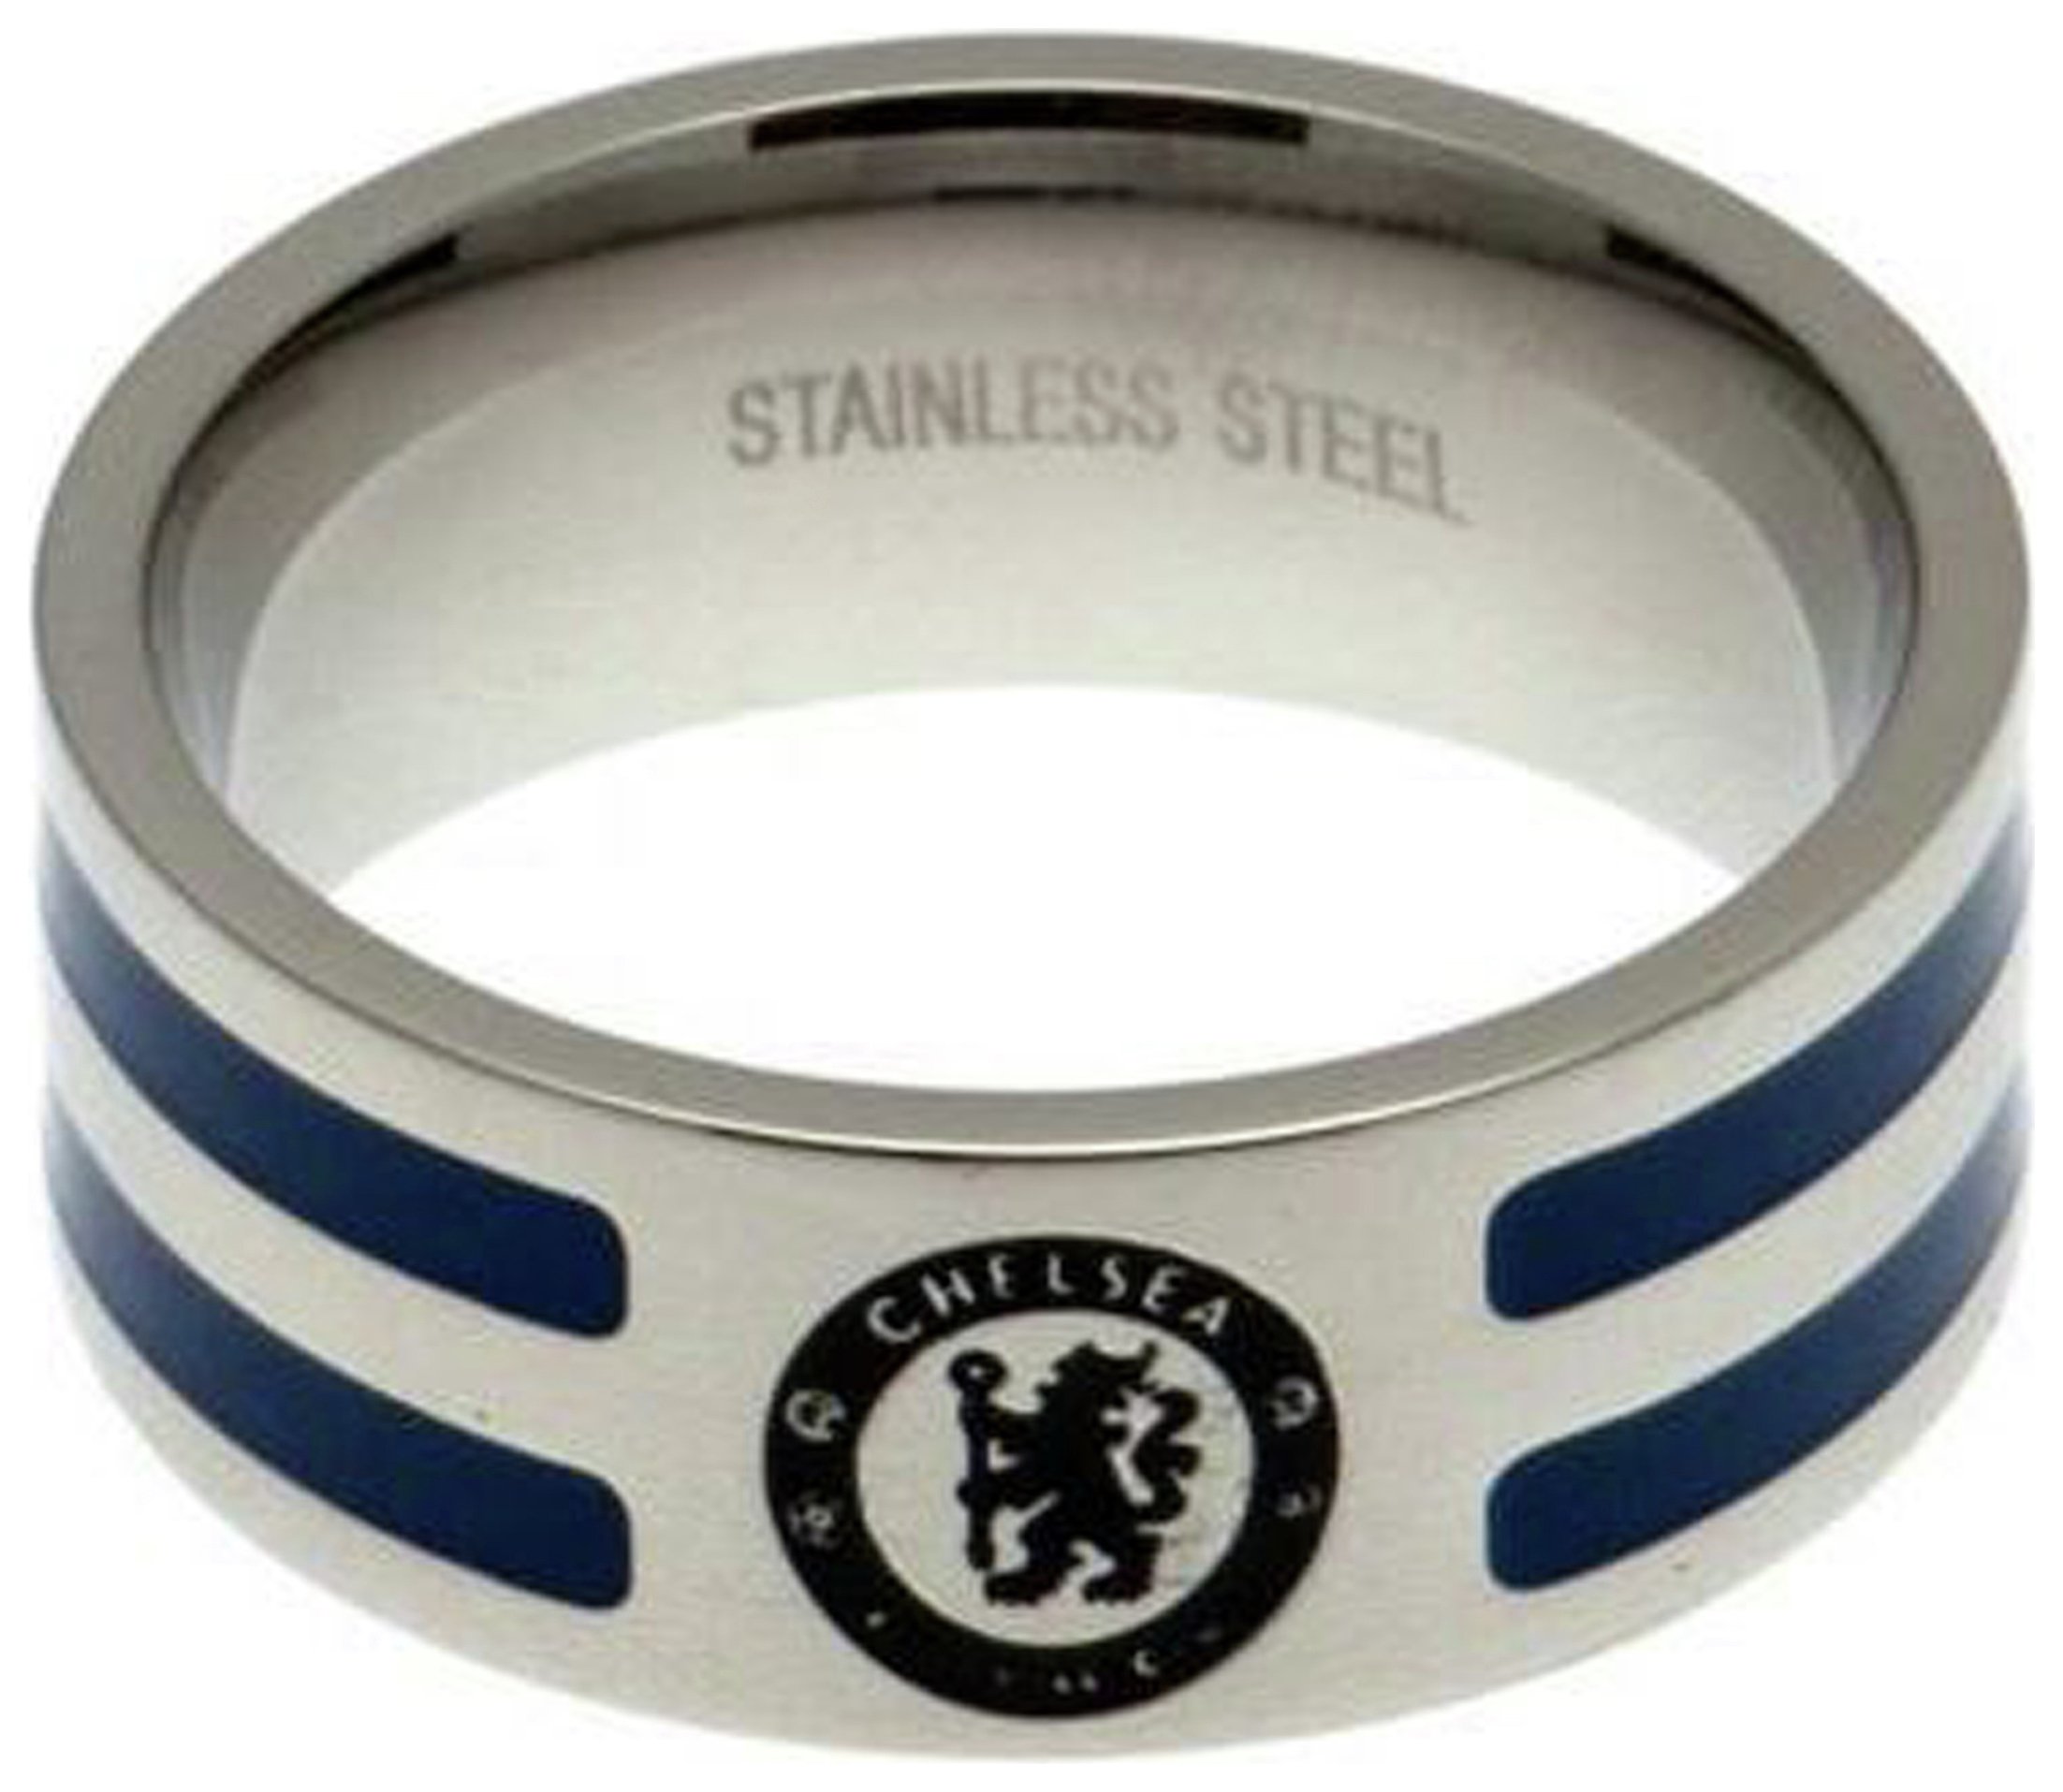 Stainless Steel Chelsea Striped Ring - Size R